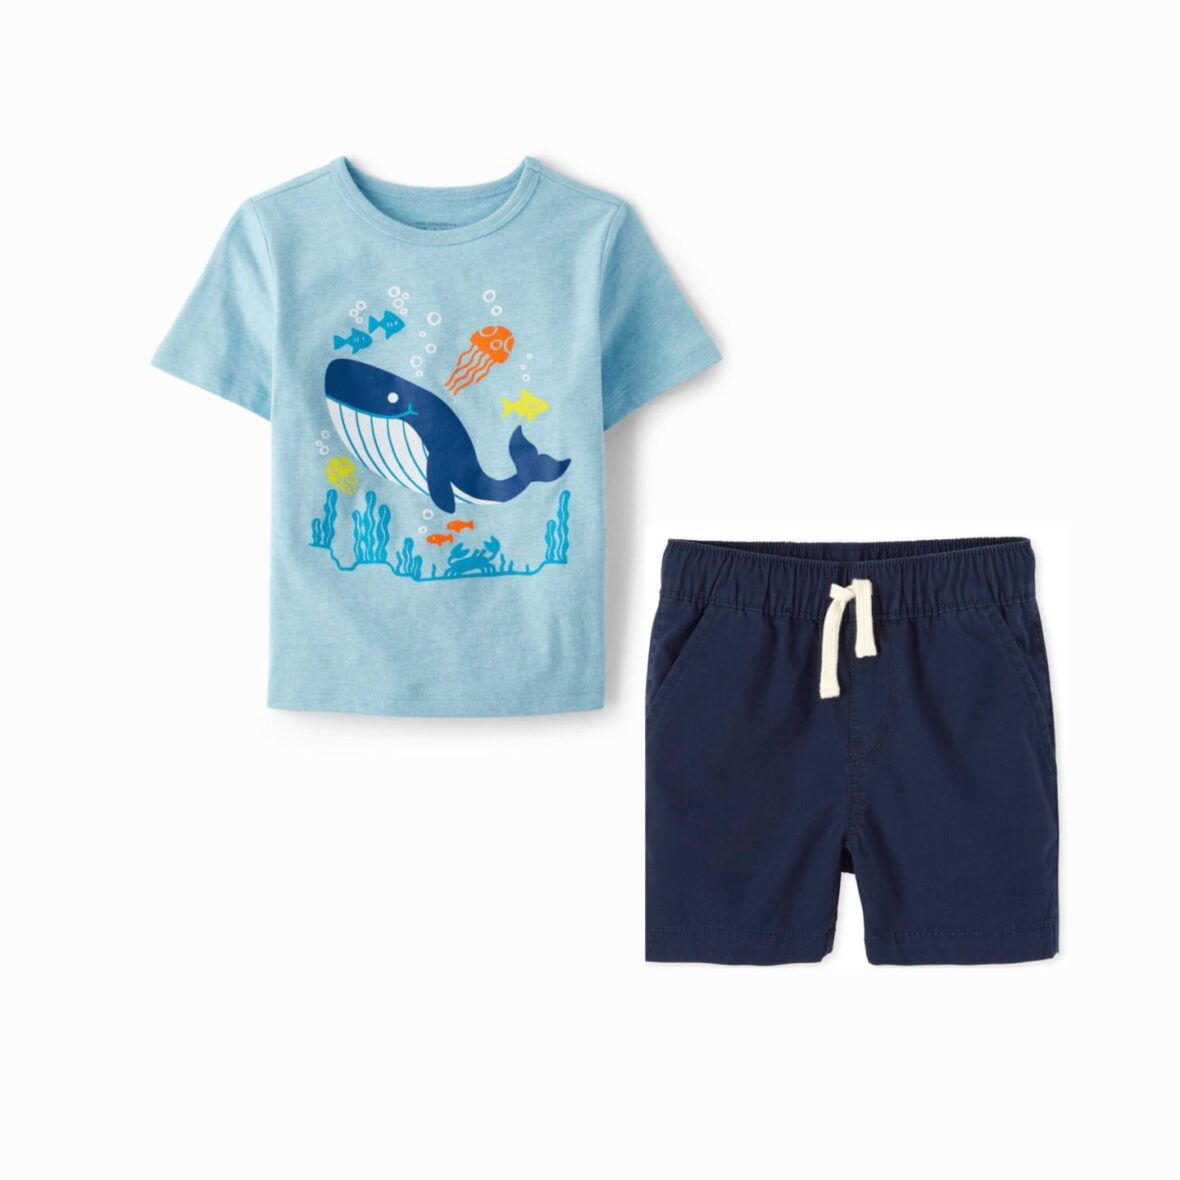 Children’s Place Toddler Boys Whale Graphic Tee & Navy Twill Shorts 2 – Piece Set